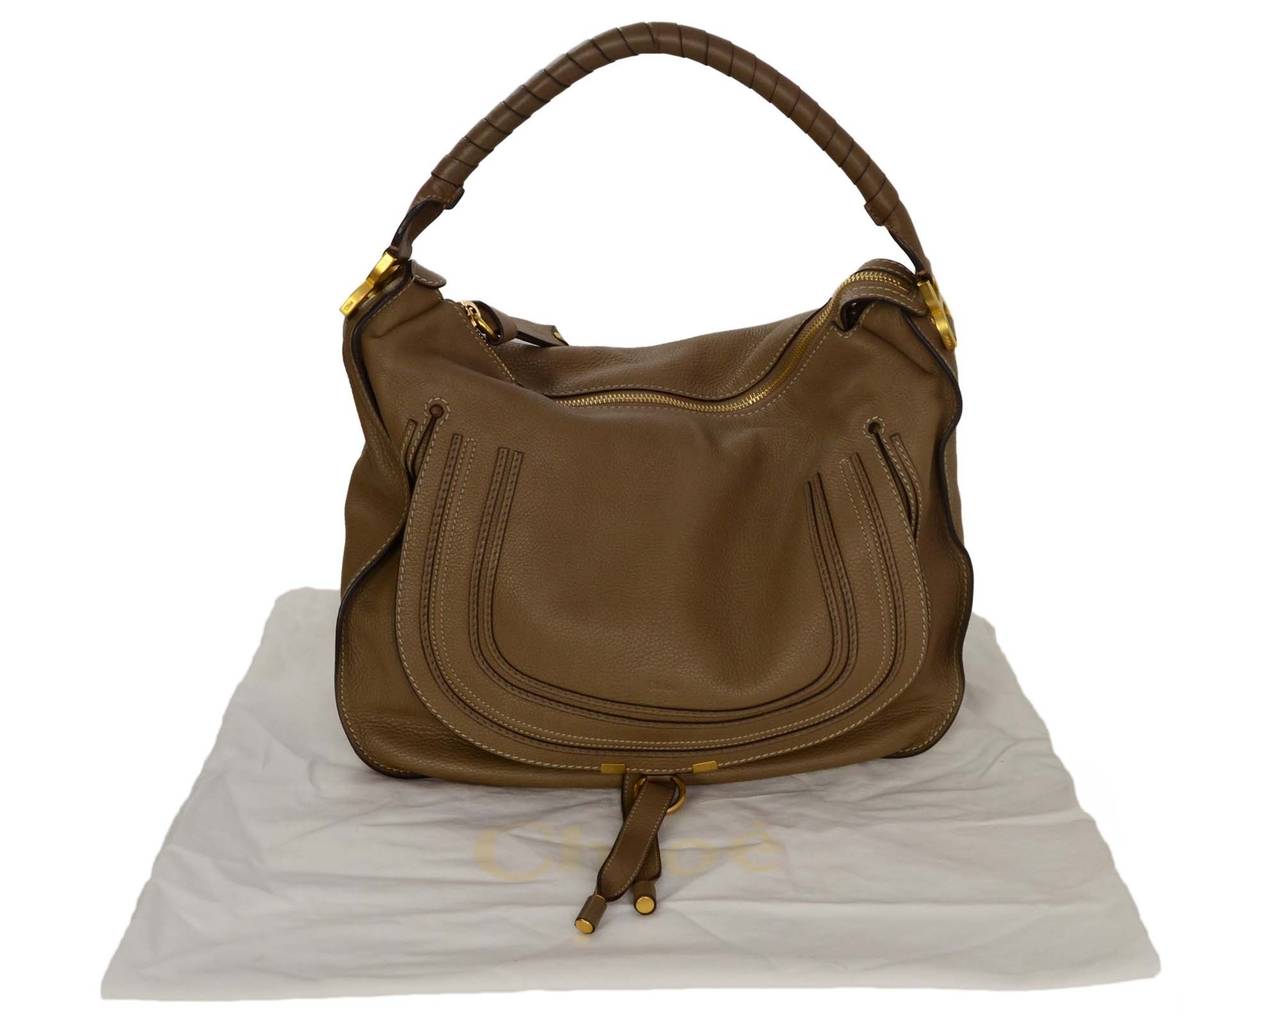 CHLOE Taupe Leather Large Marcie Hobo Bag GHW 4